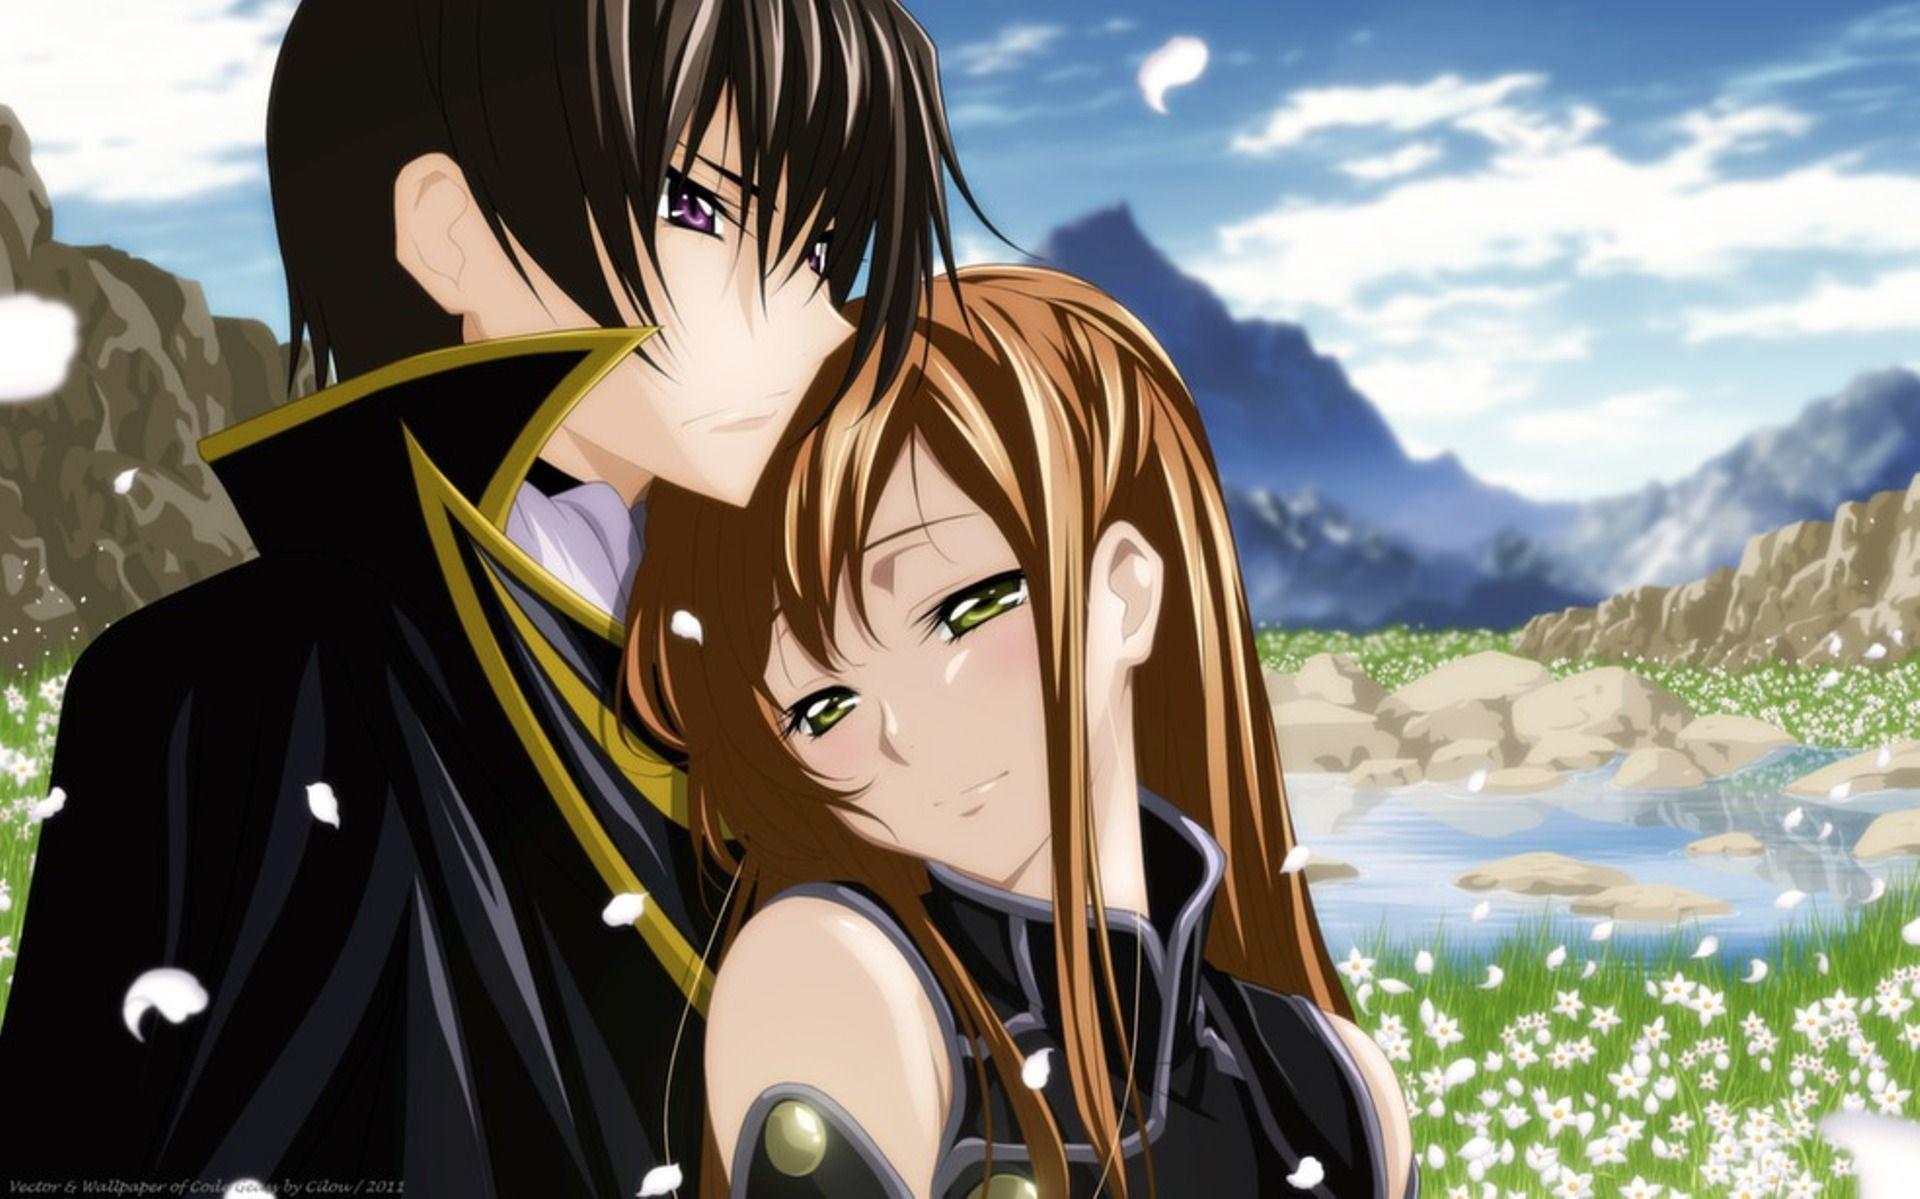 Holding Hands Romantic Anime Wallpapers - Top Free Holding Hands